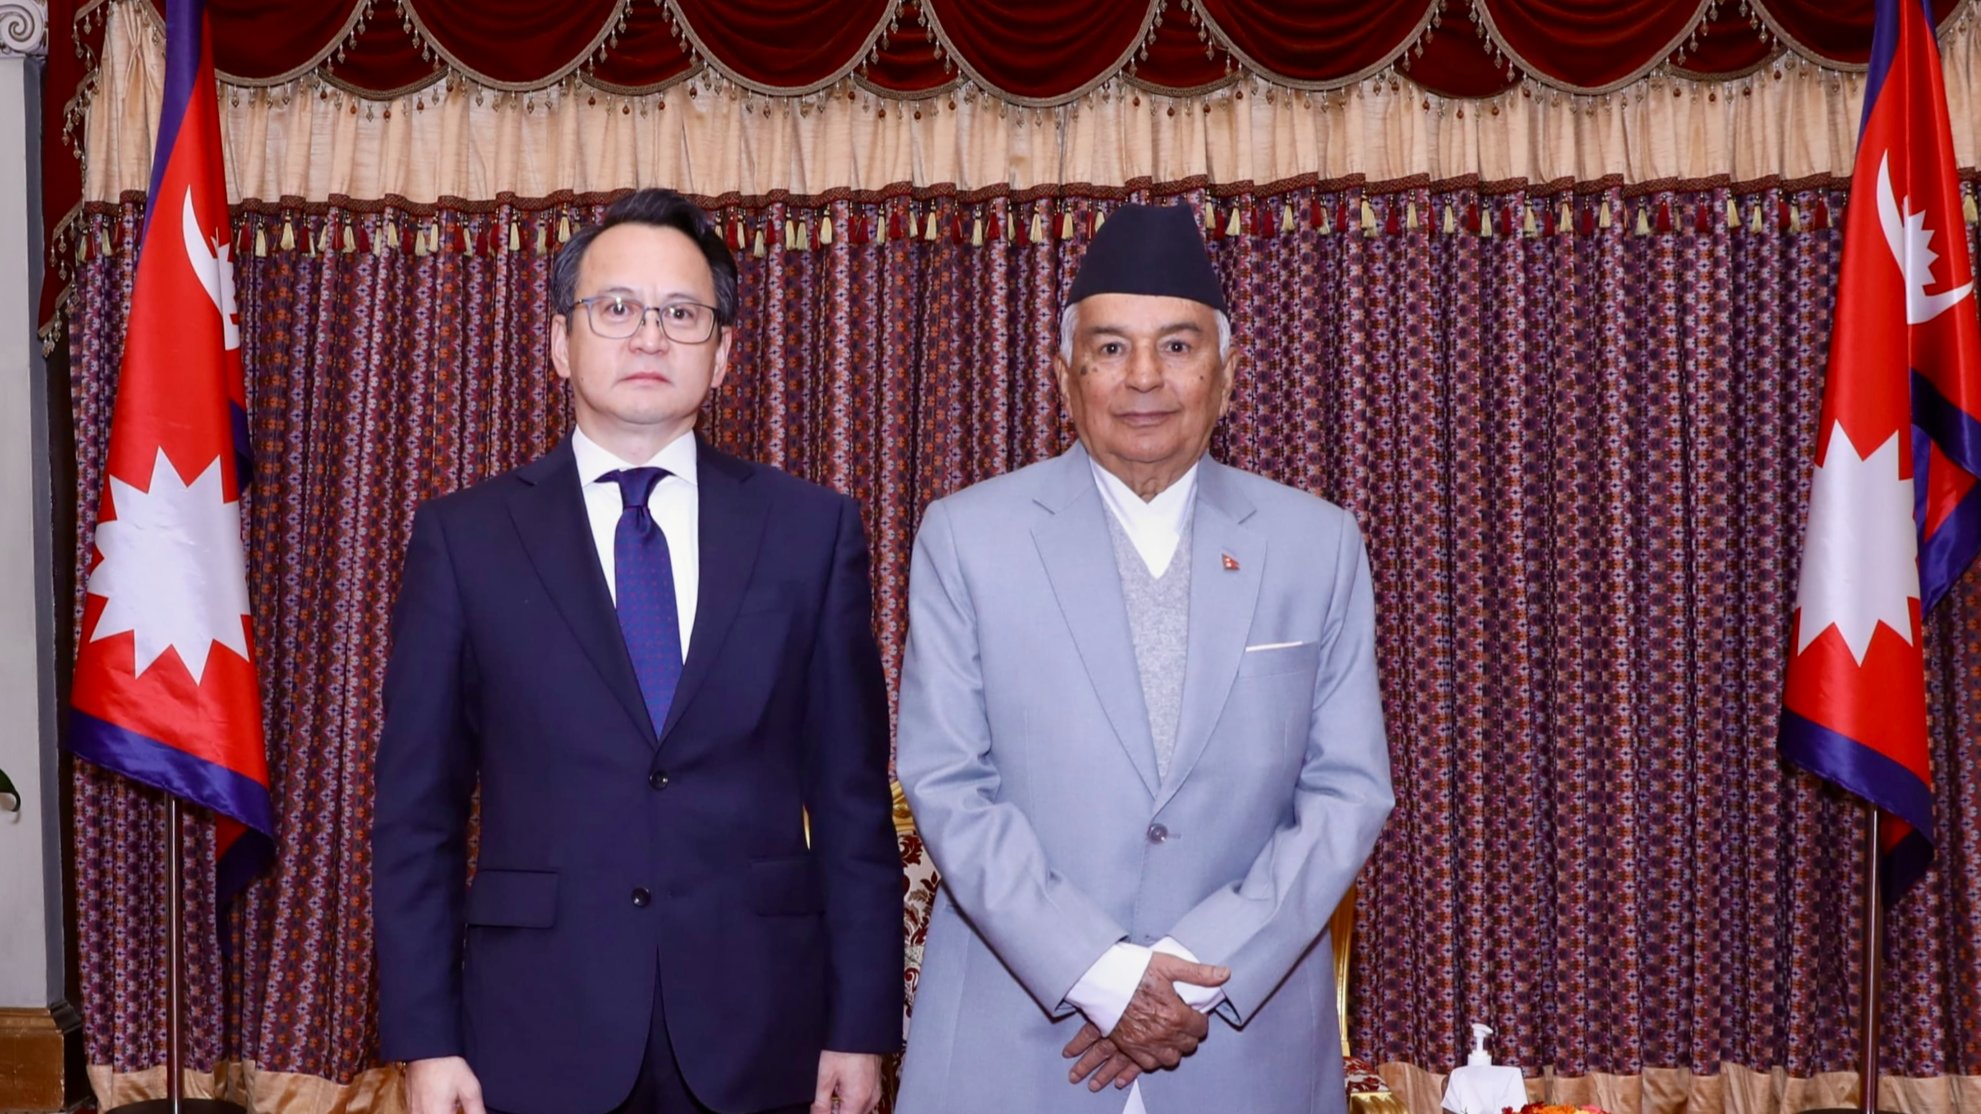 Ambassador to Nepal presents letter of credentials